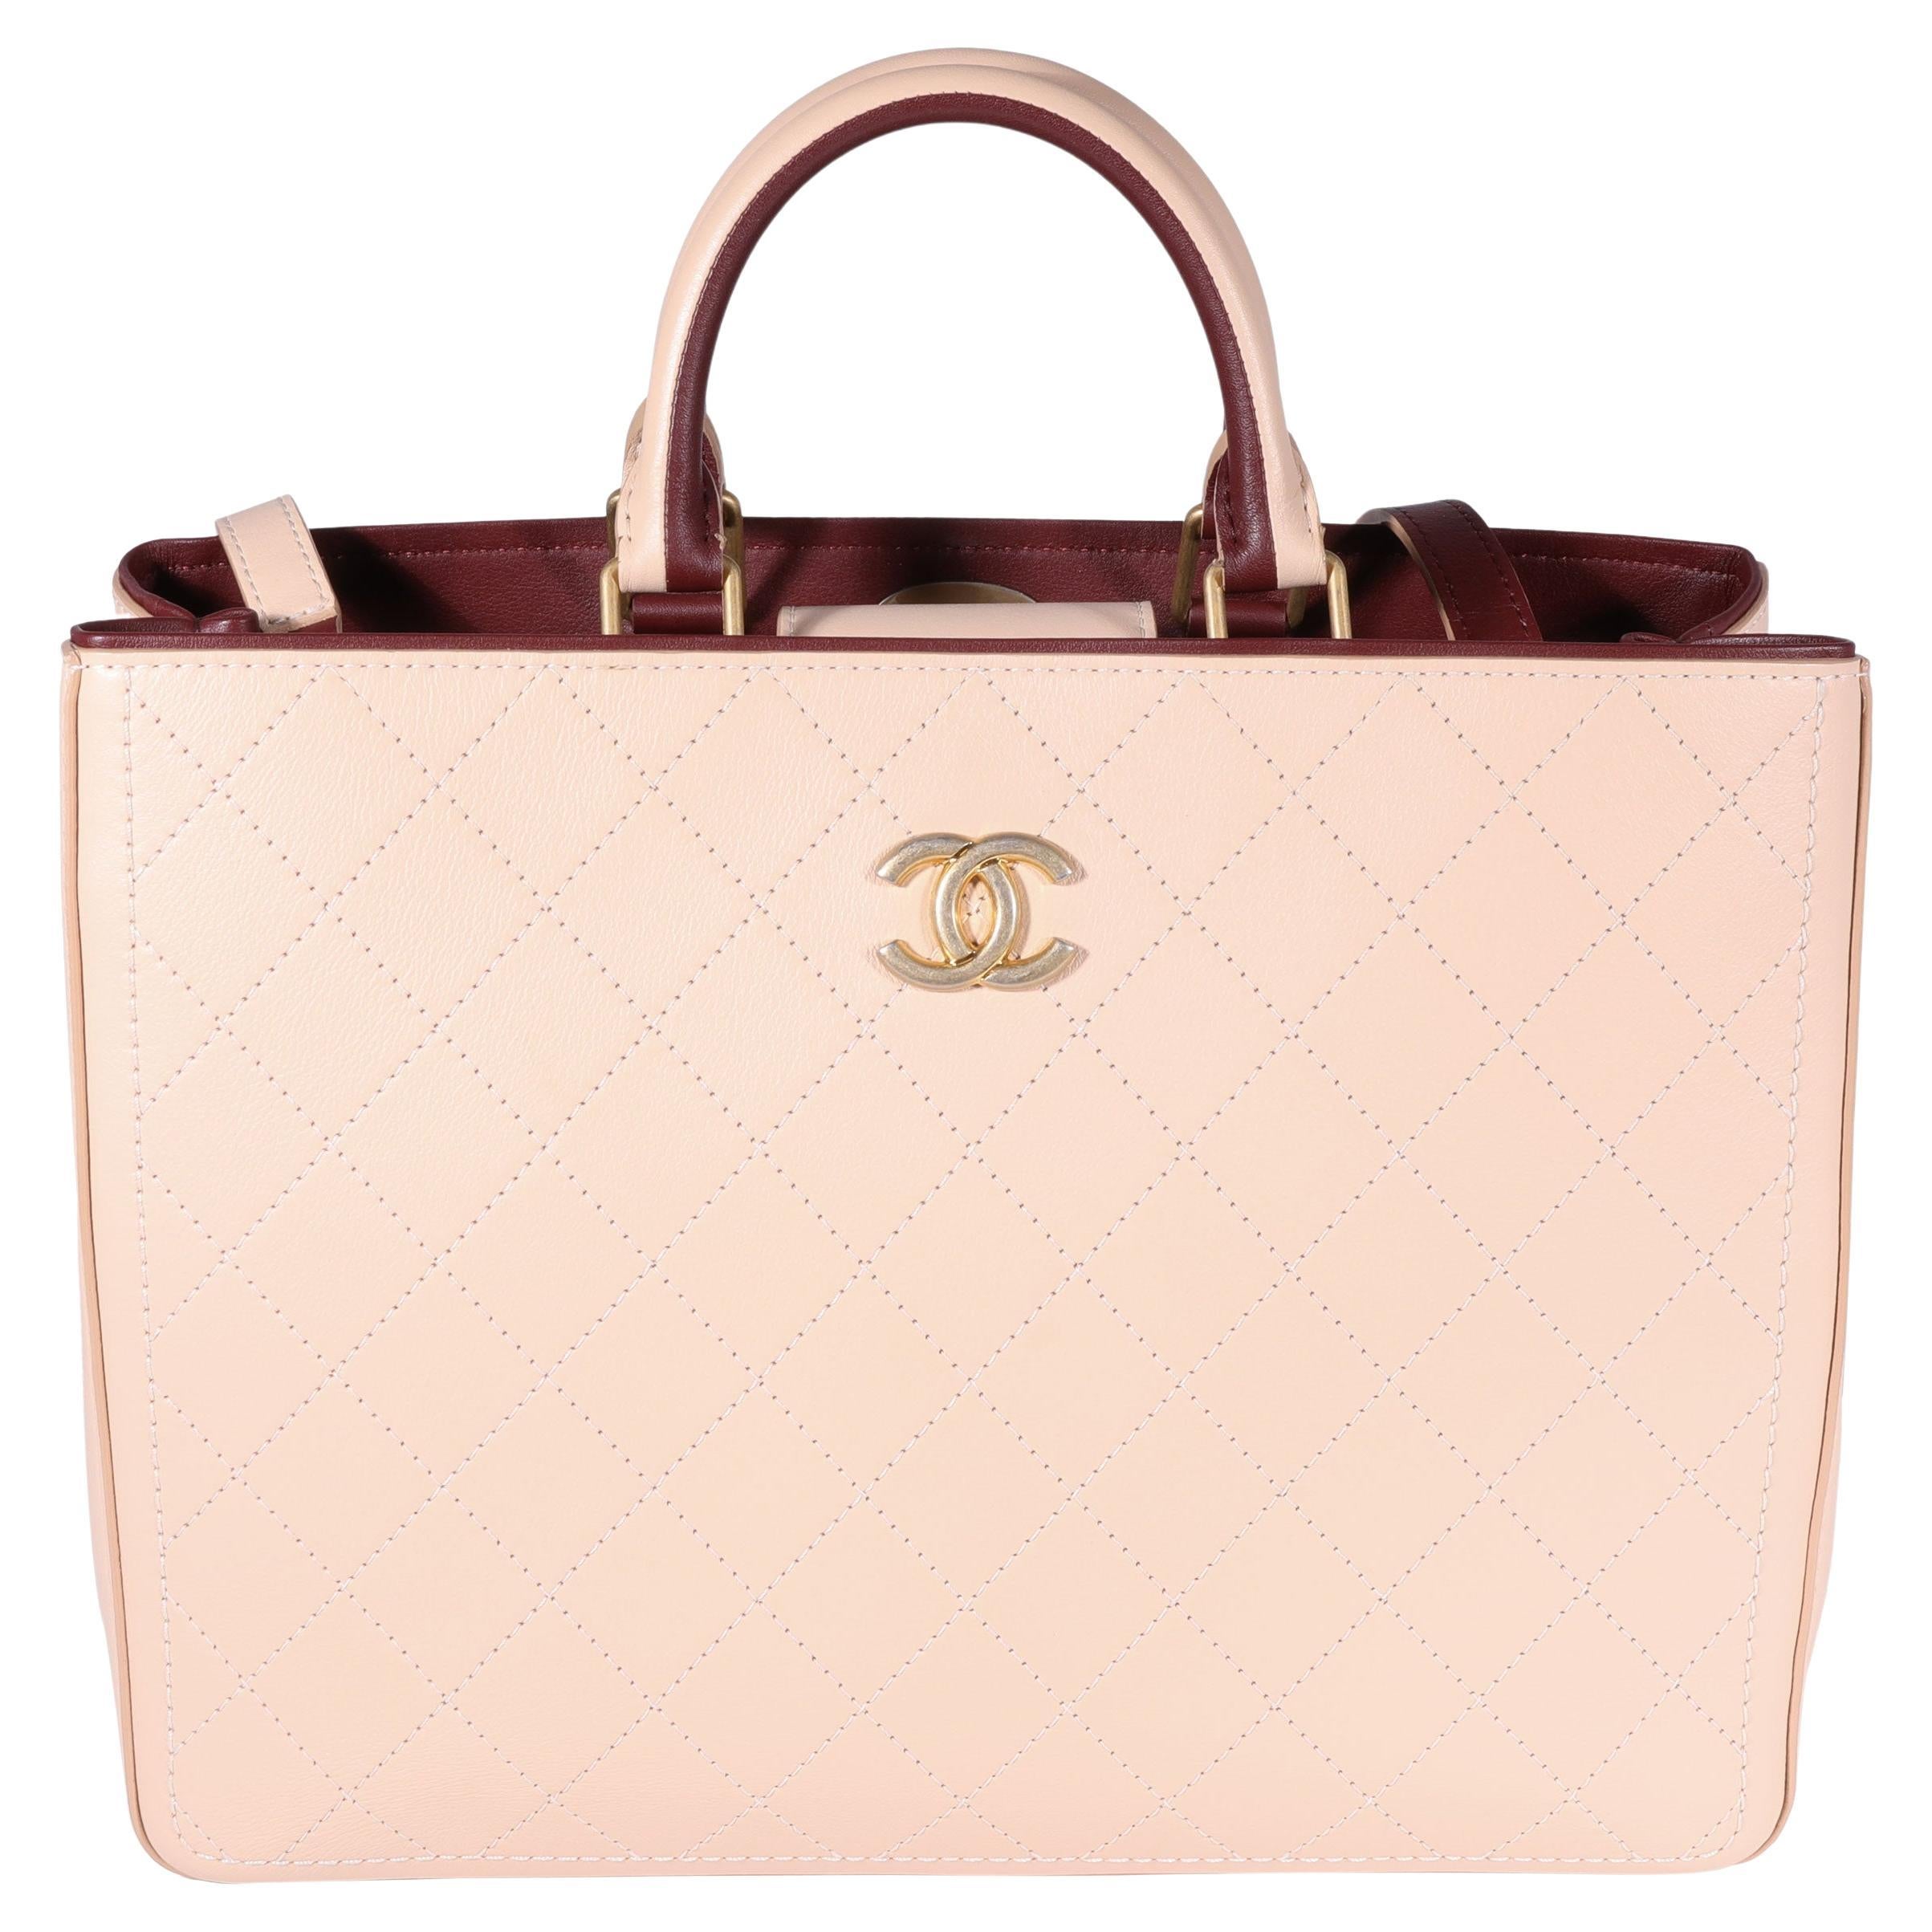 Chanel Beige & Burgundy Quilted Calfskin Shopping Tote